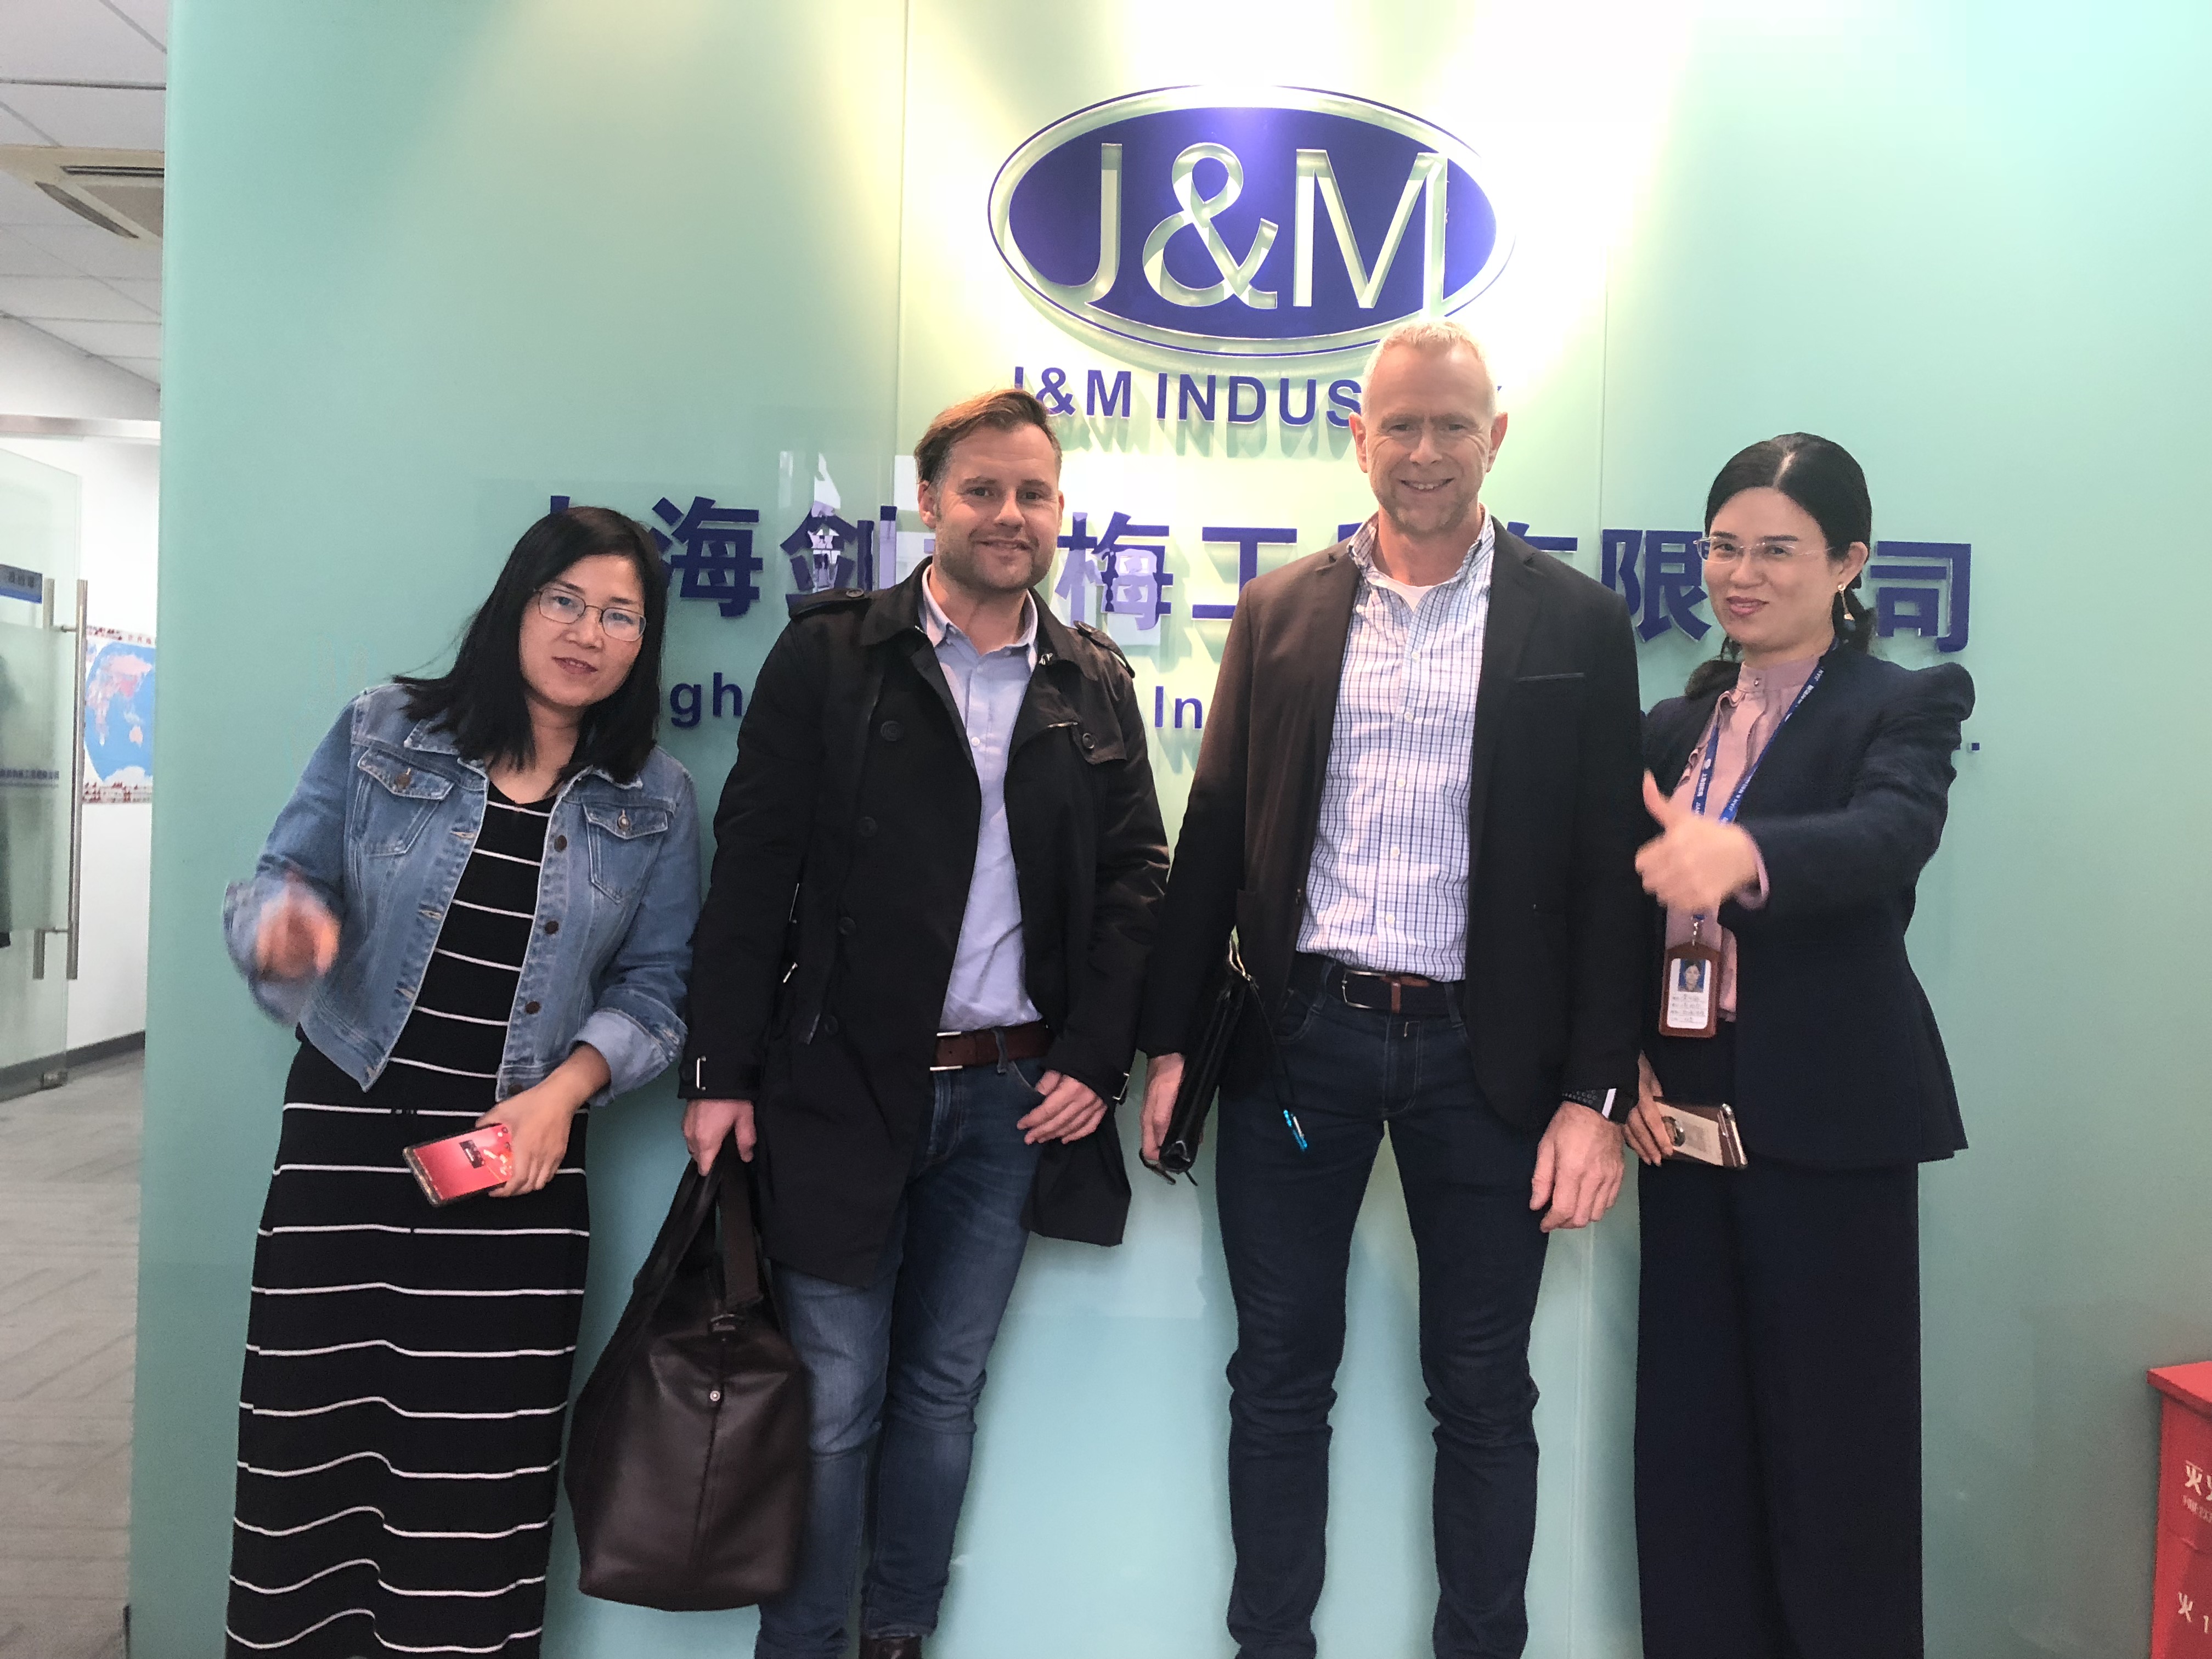 Nov.2nd 2018， our customers from Norway visit us